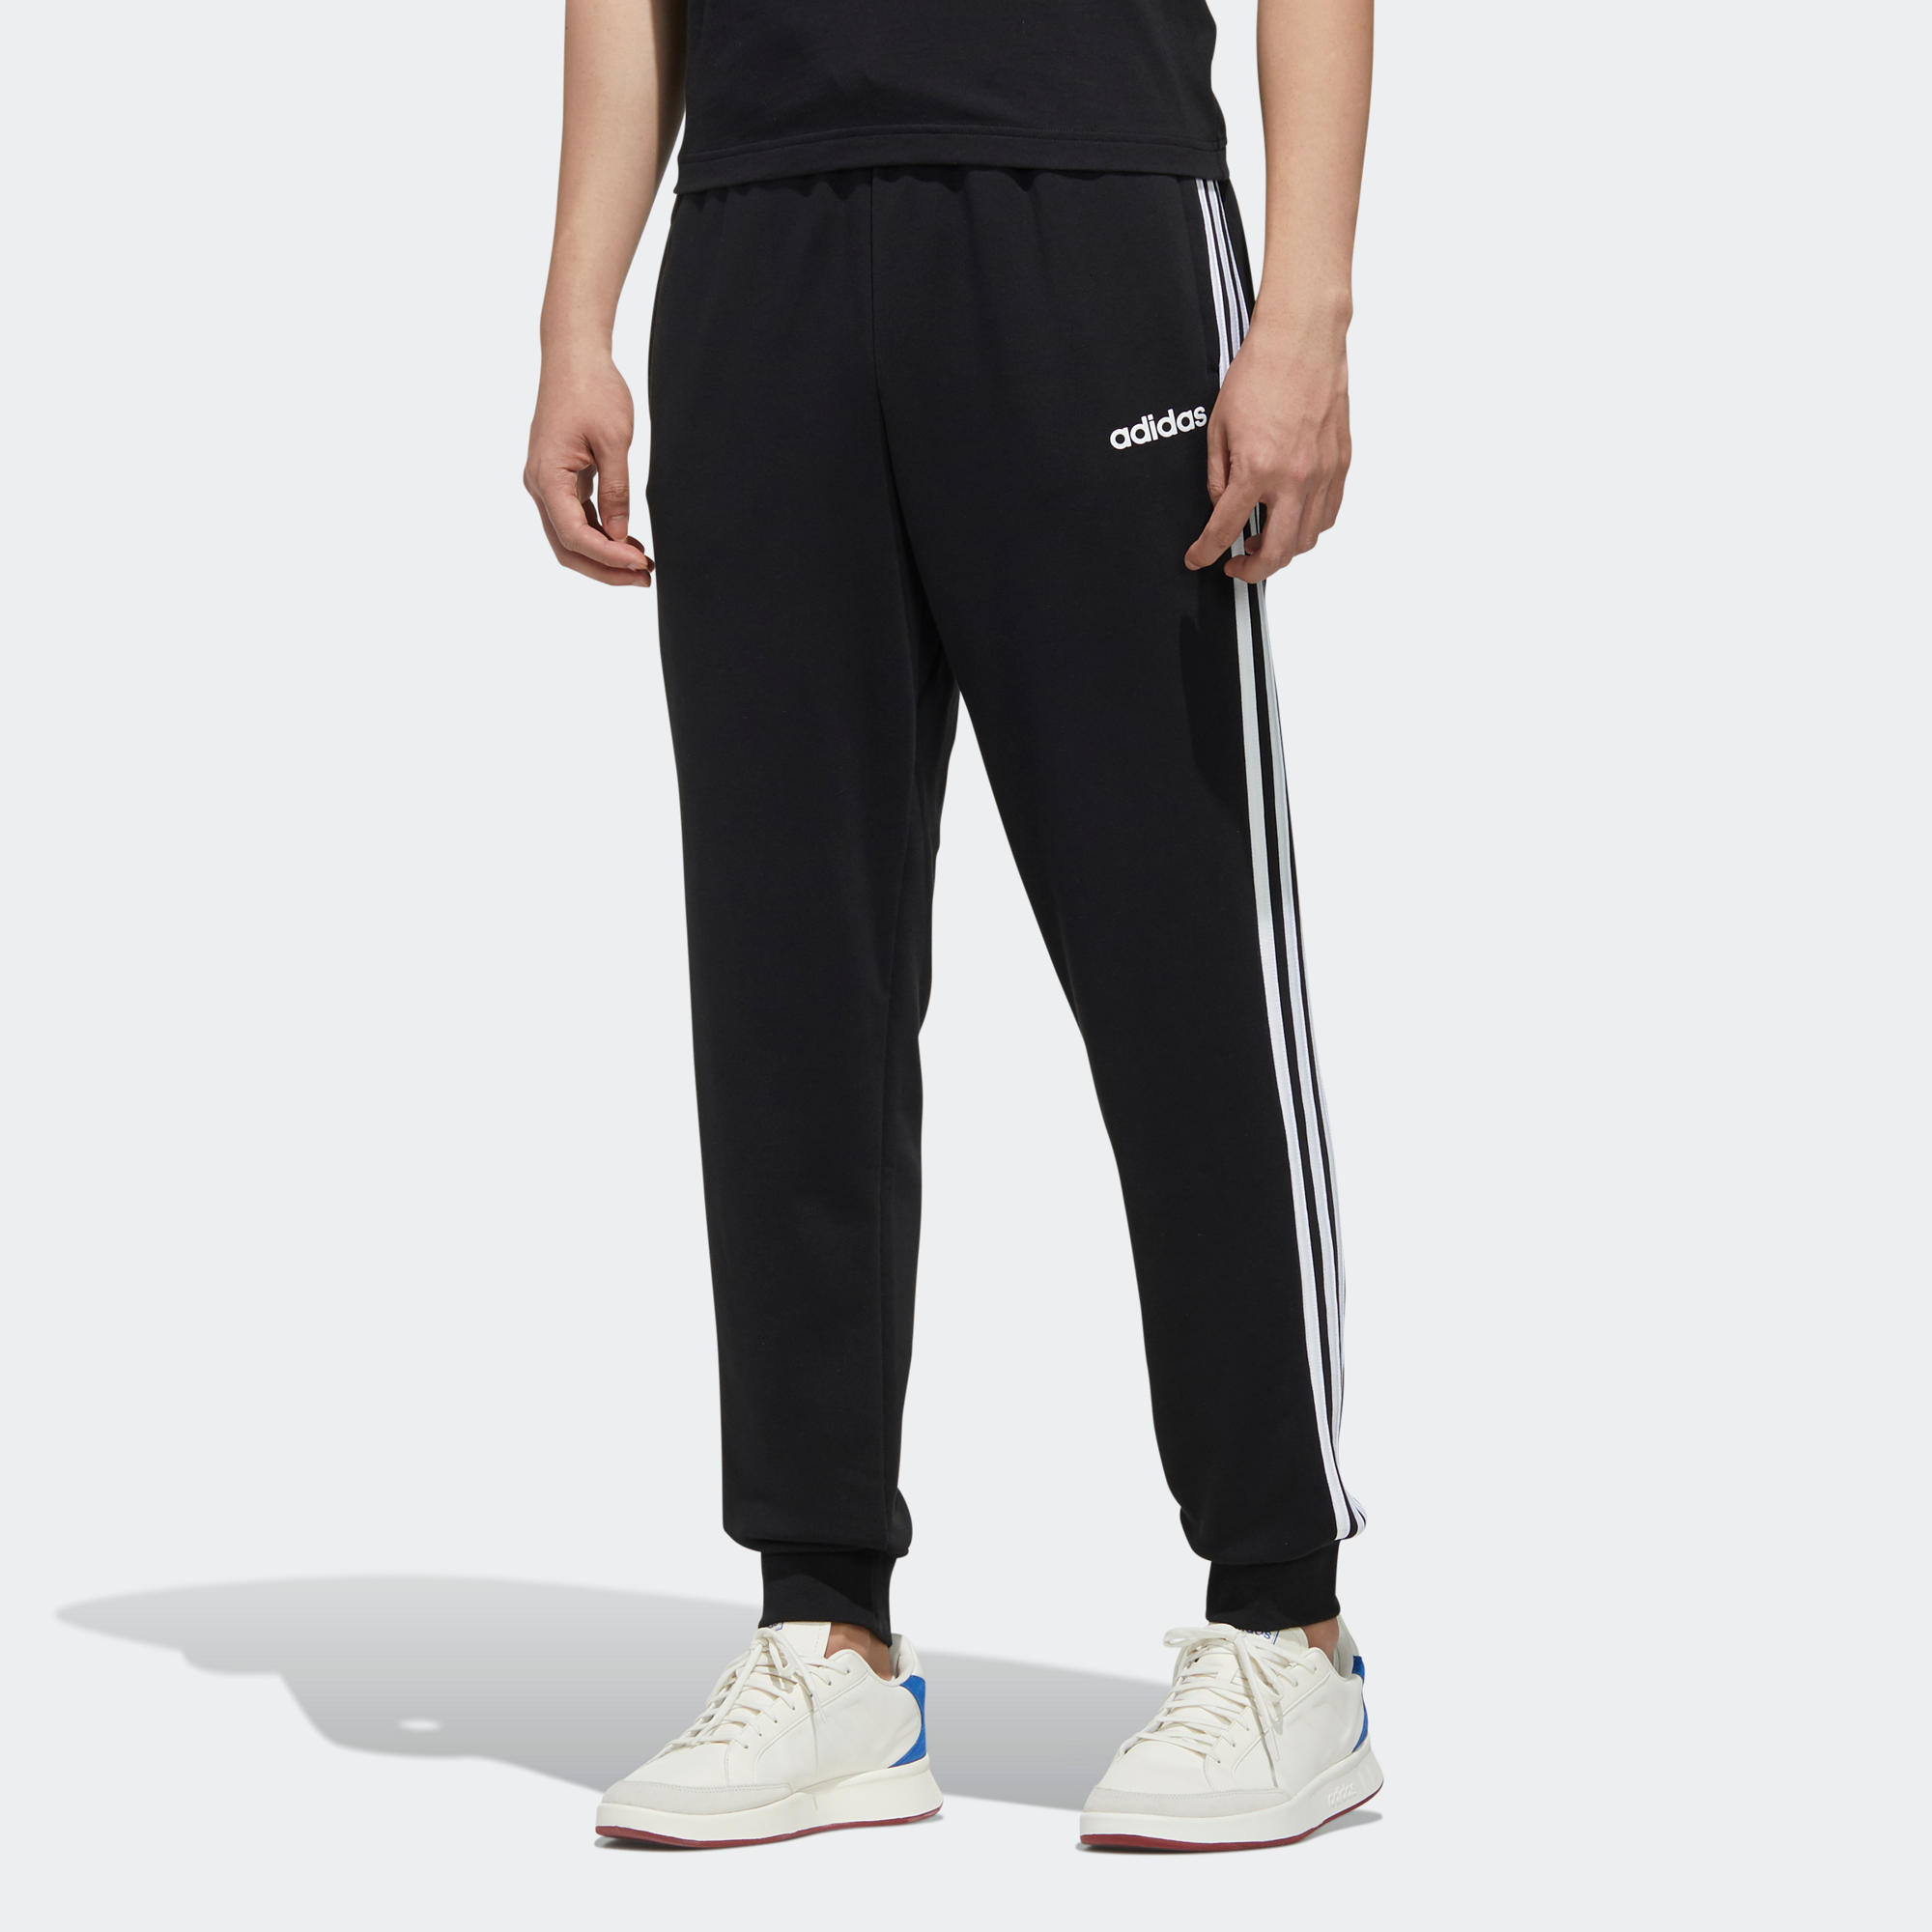 adidas 3s tracksuit bottoms